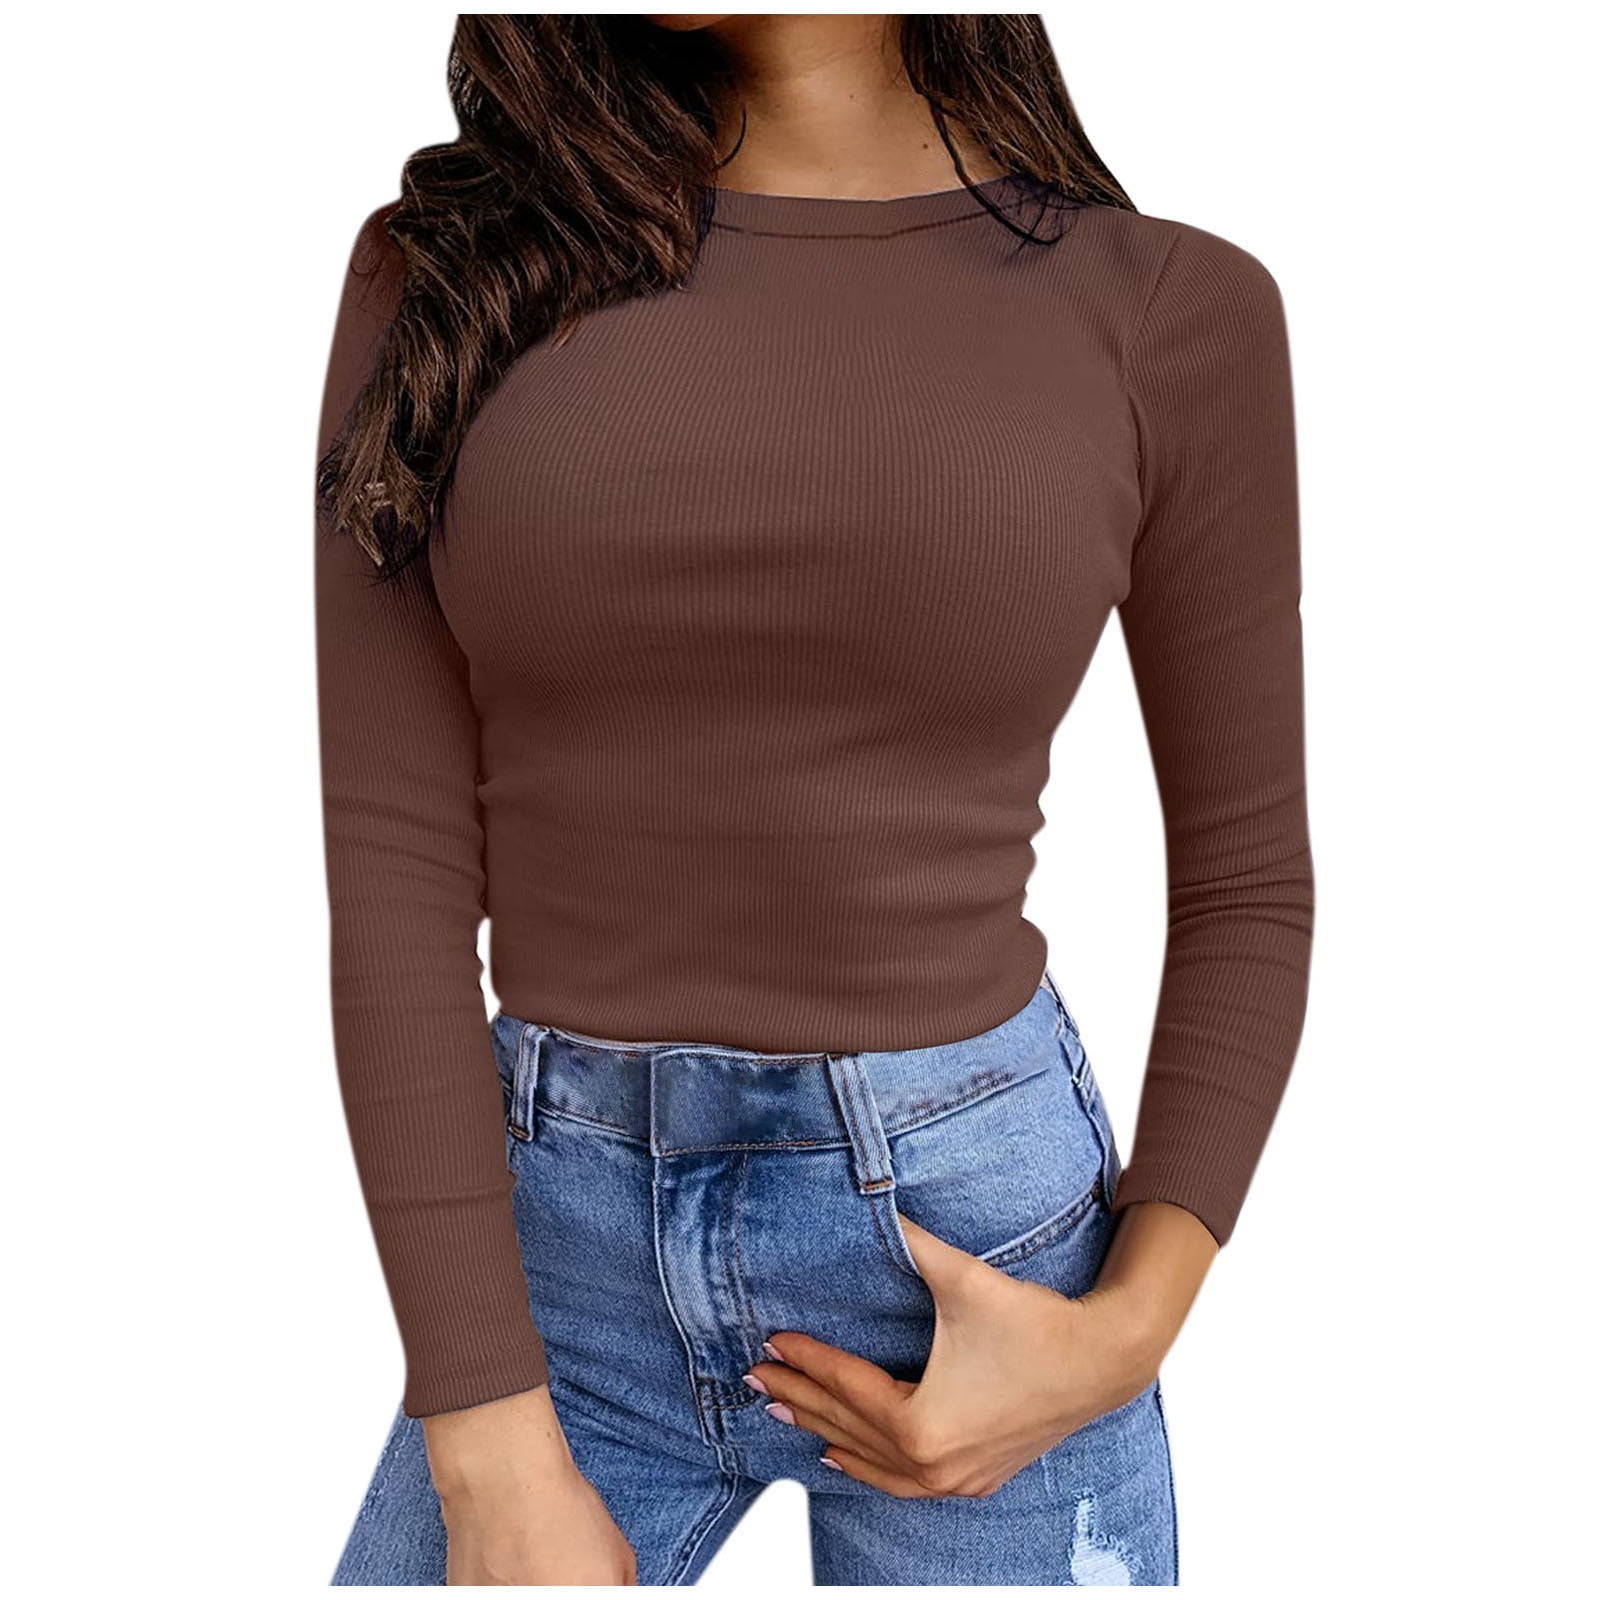 Women's Ribbed Knit Tops Crewneck Solid Color Long Sleeve T Shirts Slim ...